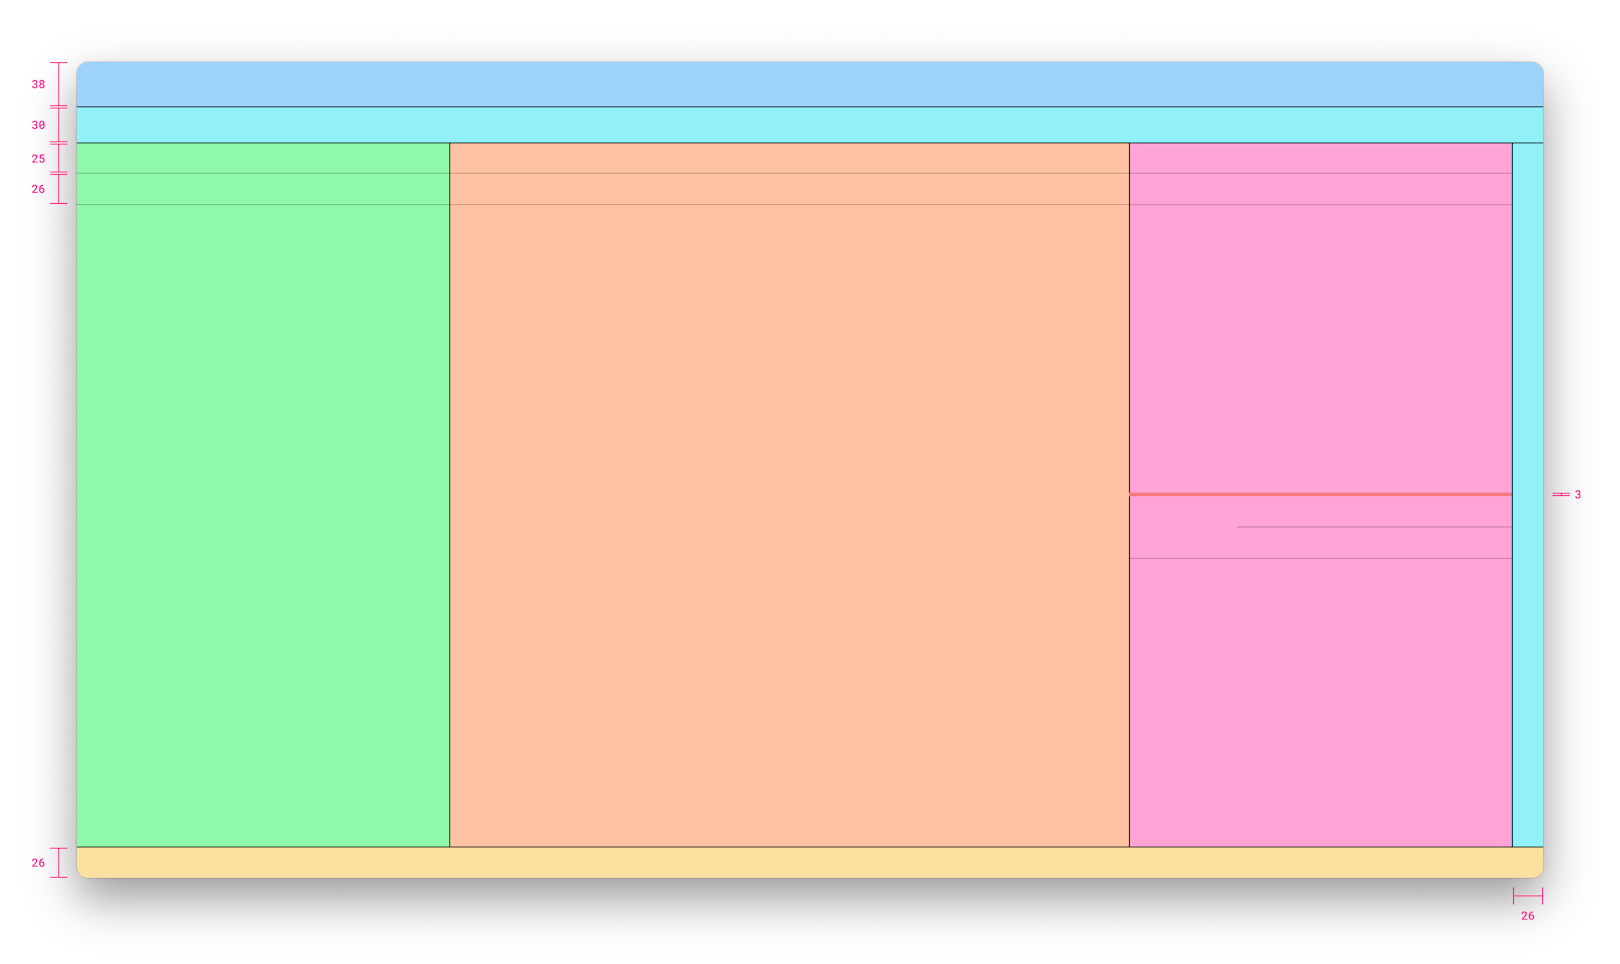 Color-coded mockup of the IDE main windows with redline annotations indicating margins and dimensions for layout design, featuring distinct sections for header, content, and sidebar areas.